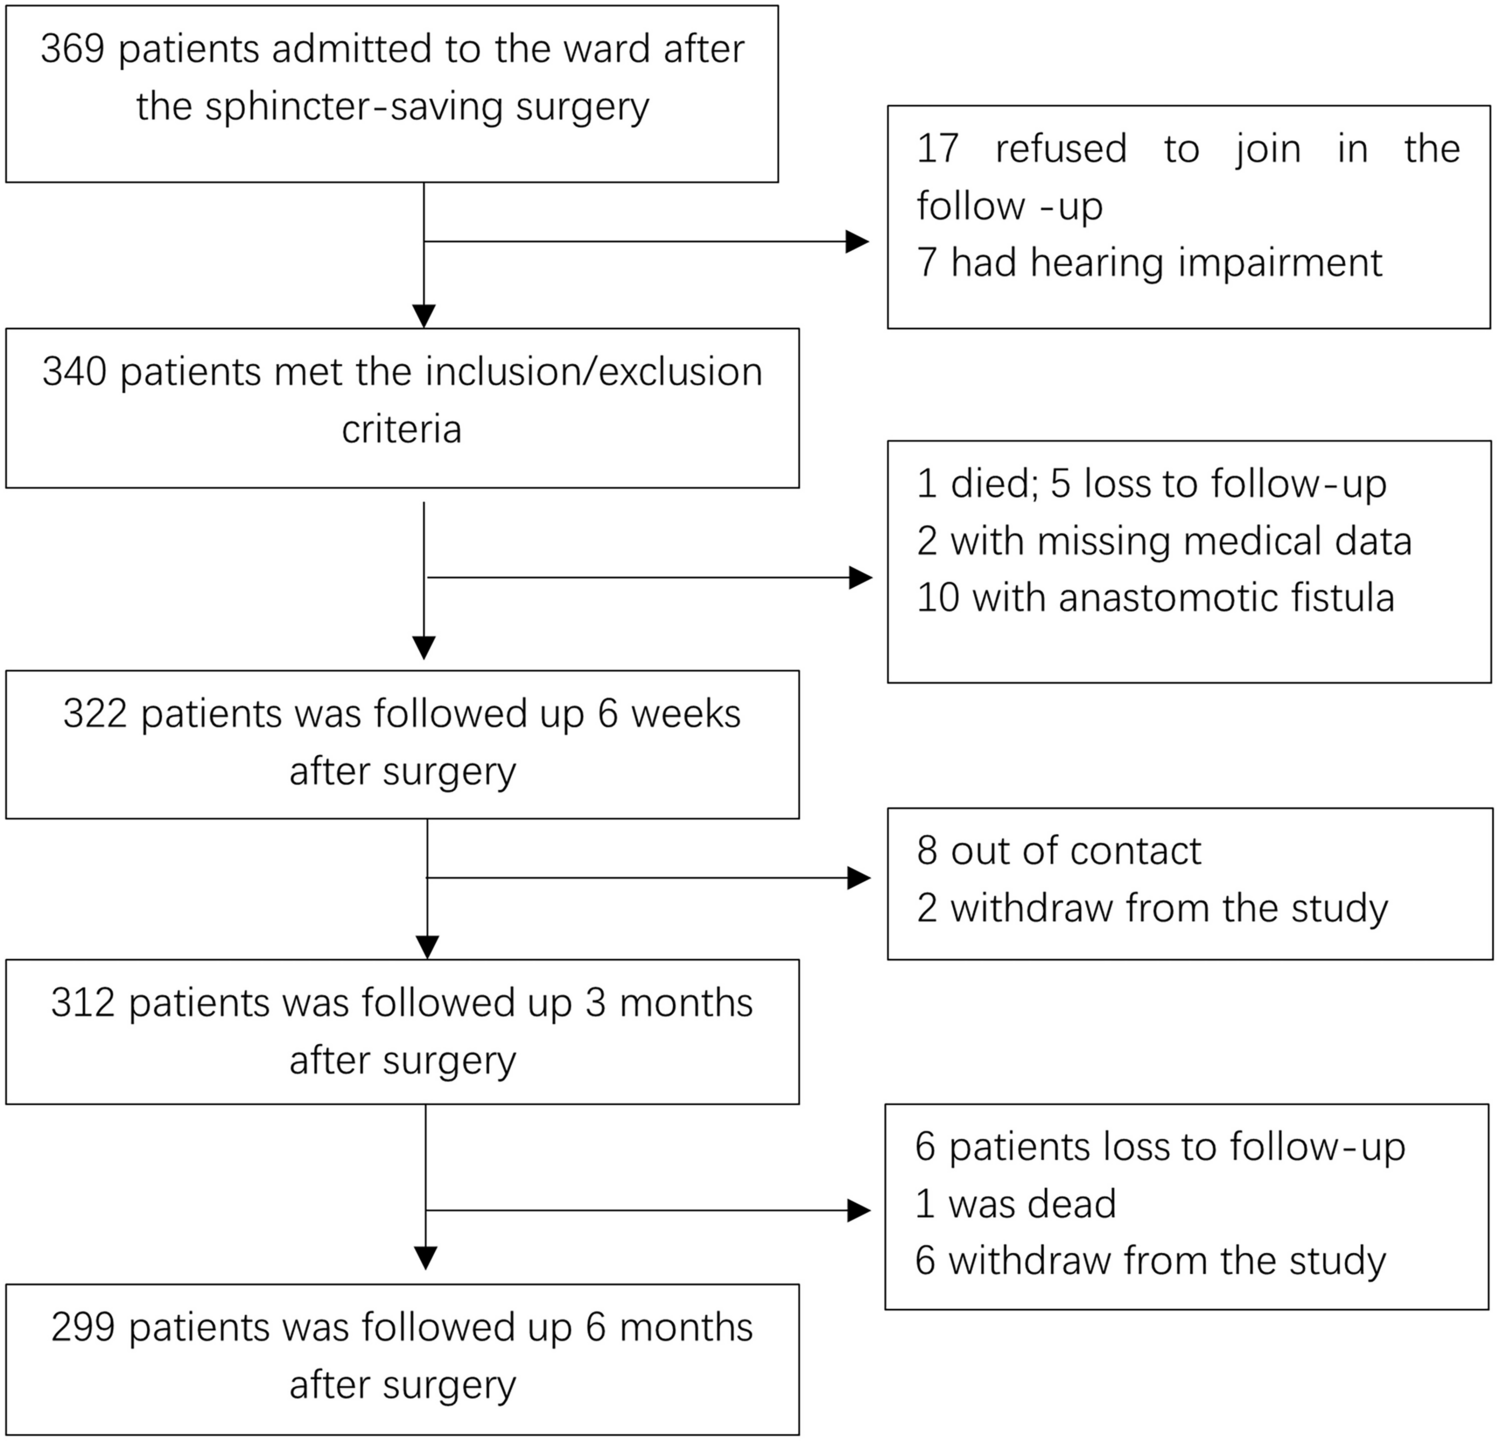 The Impact of Dietary Factors on the Relief of Bowel Dysfunction Among Patients with Rectal Cancer After the Sphincter-Saving Surgery—A Prospective Cohort Study